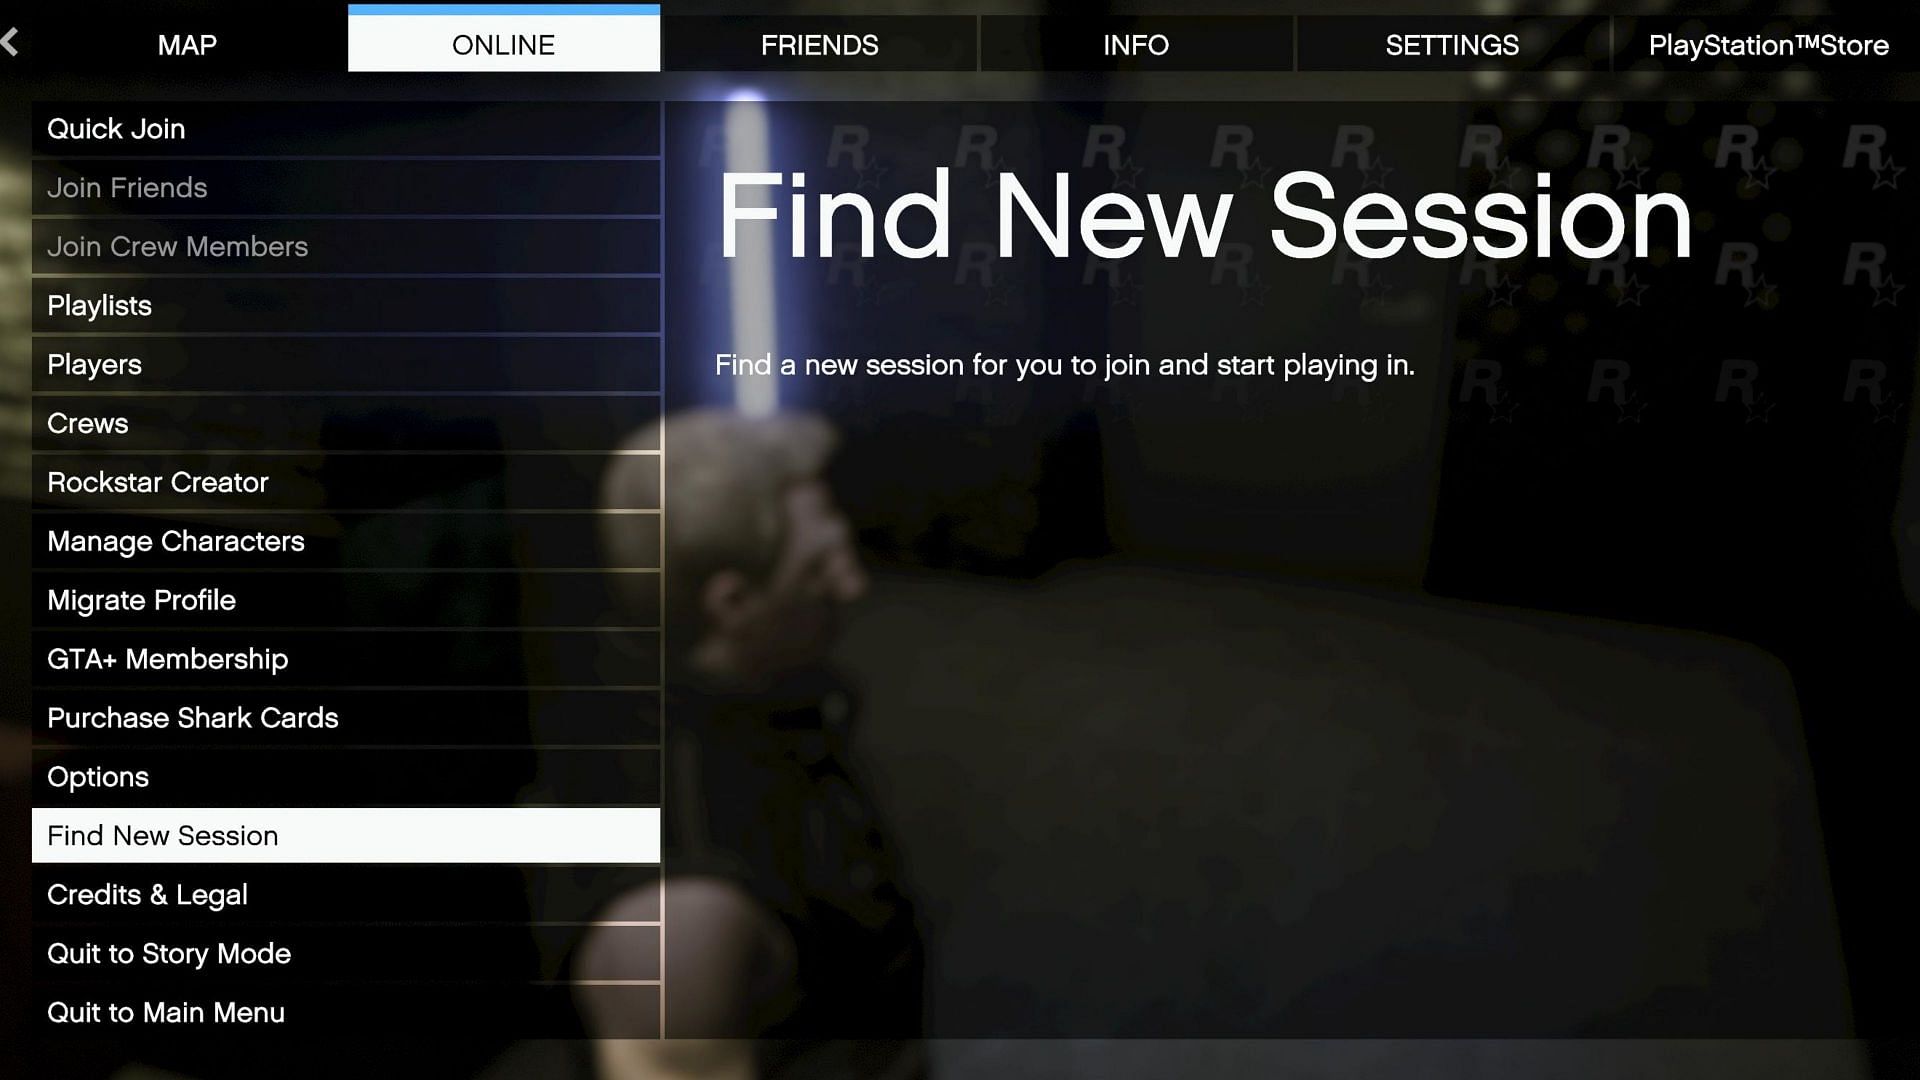 GTA Online guide: How to join a private session